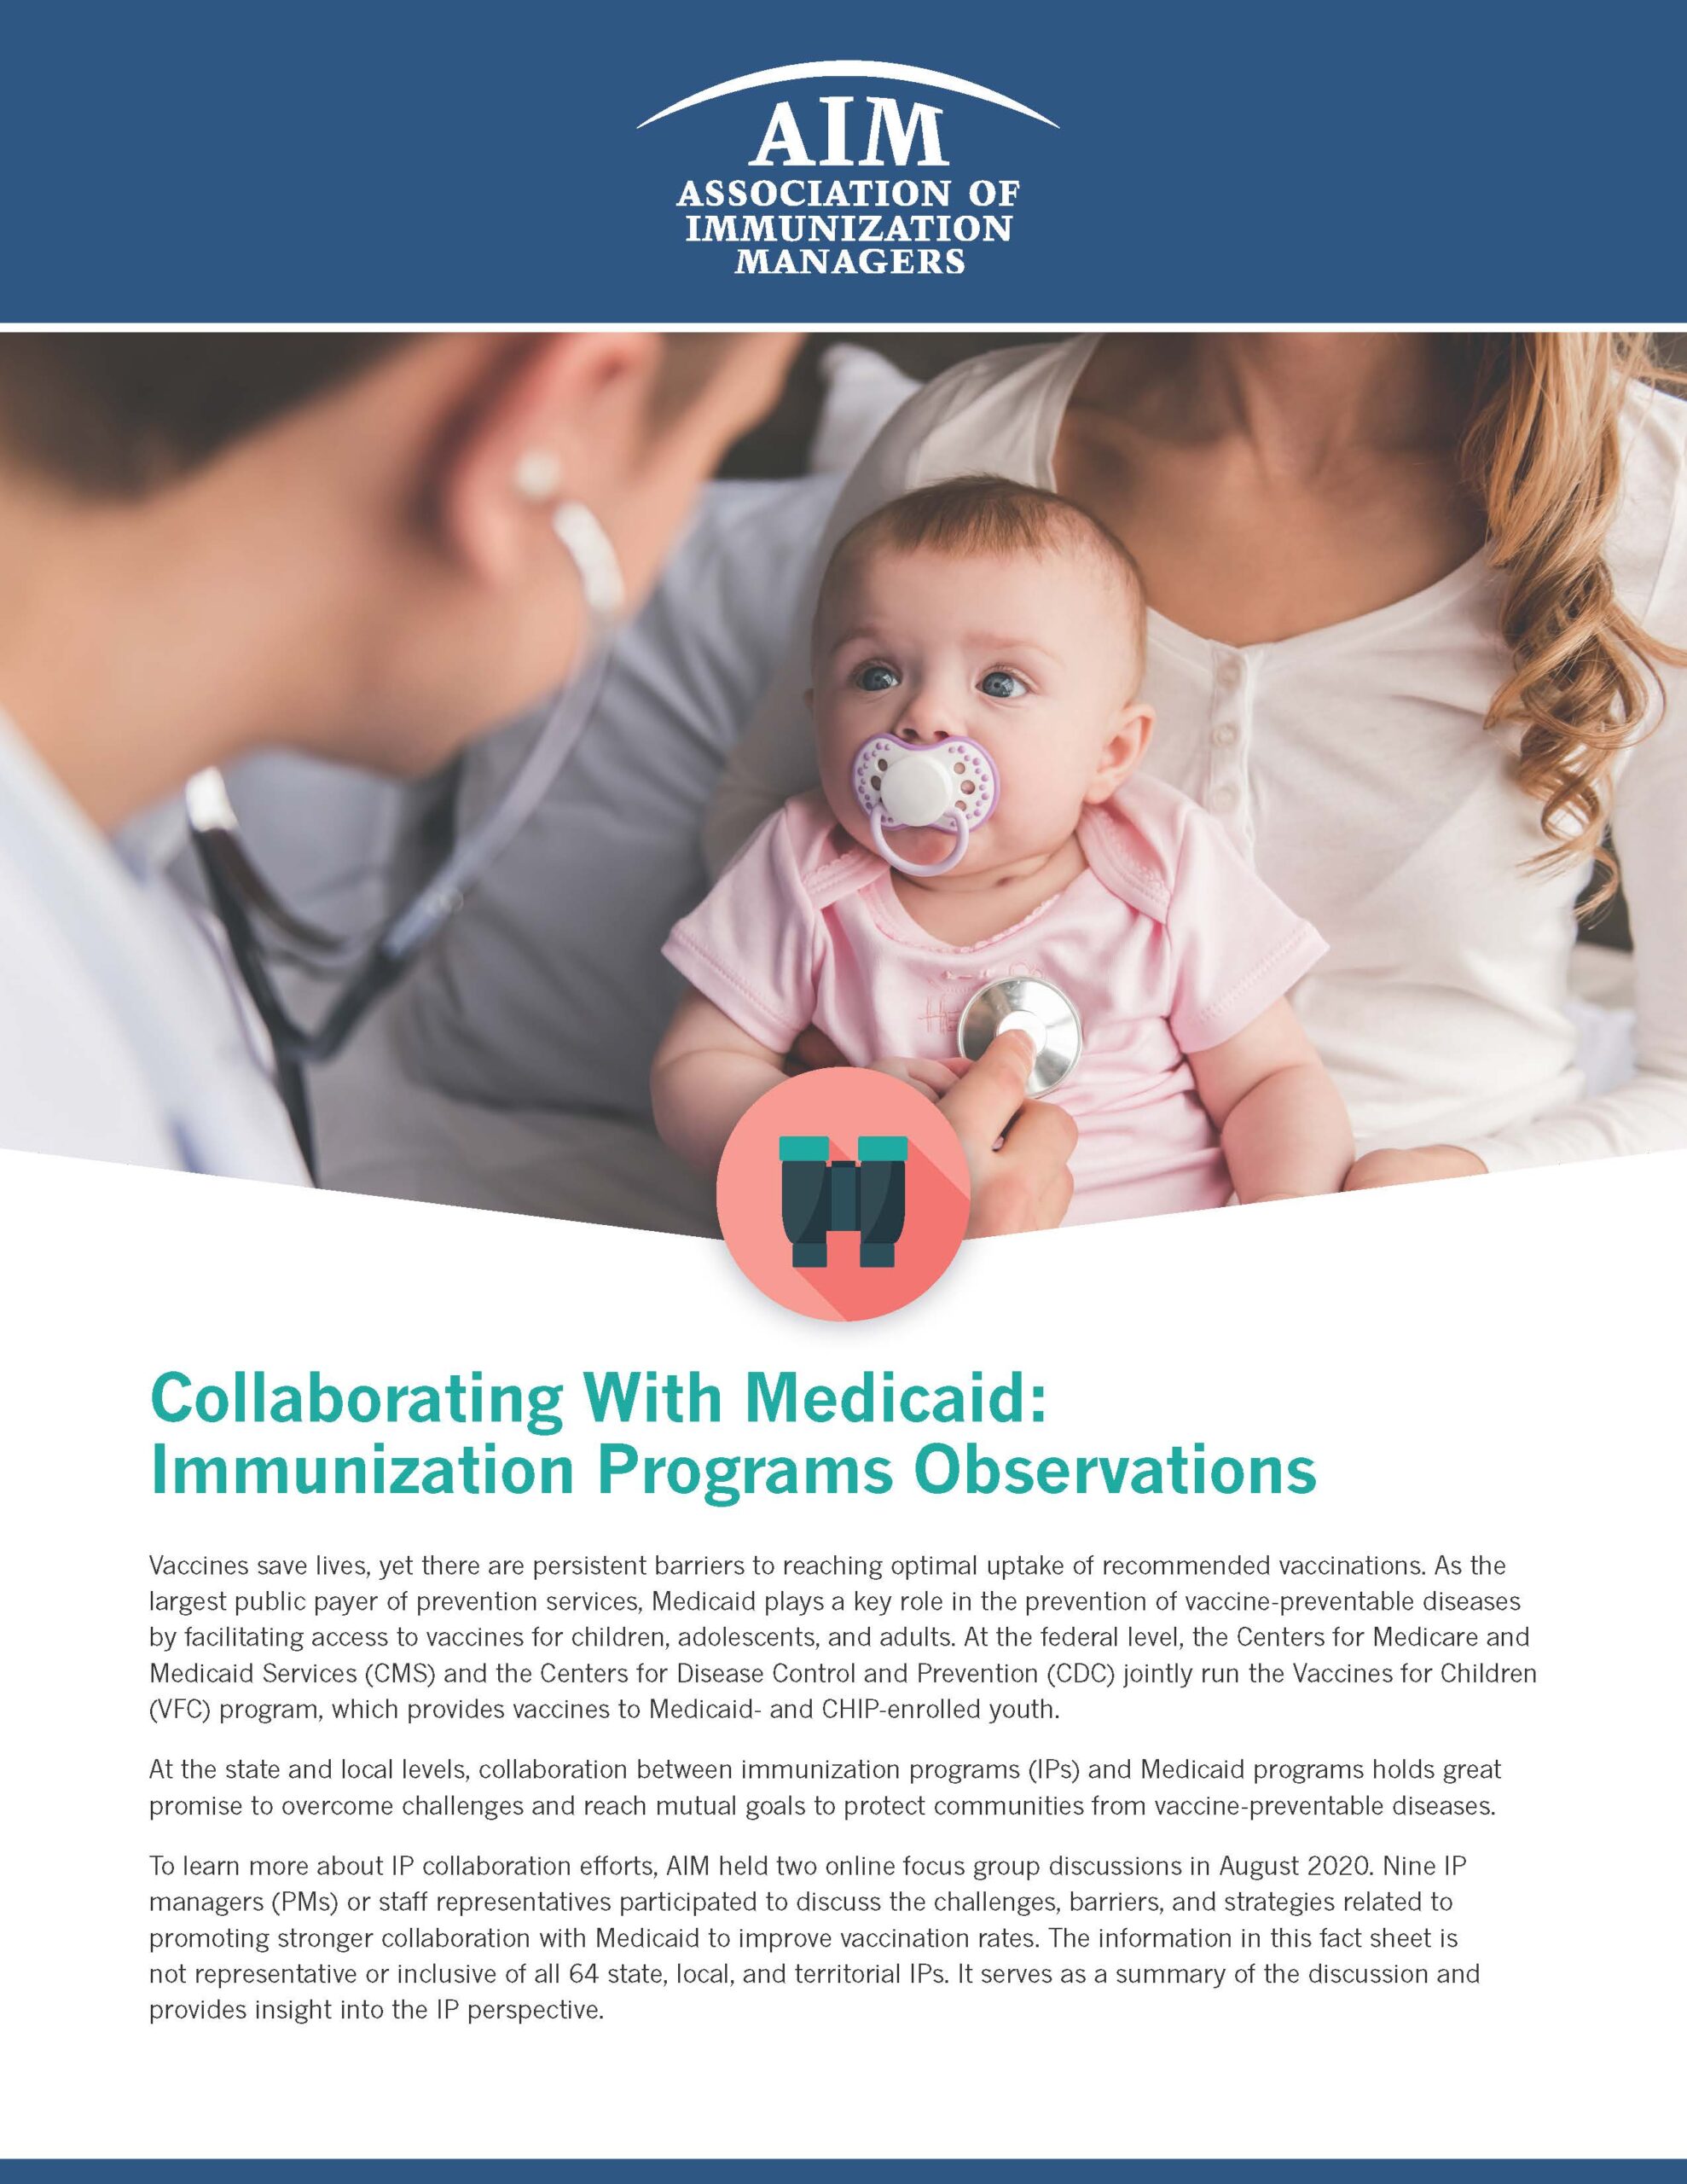 Collaborating with Medicaid Immunization Programs Observation cover image